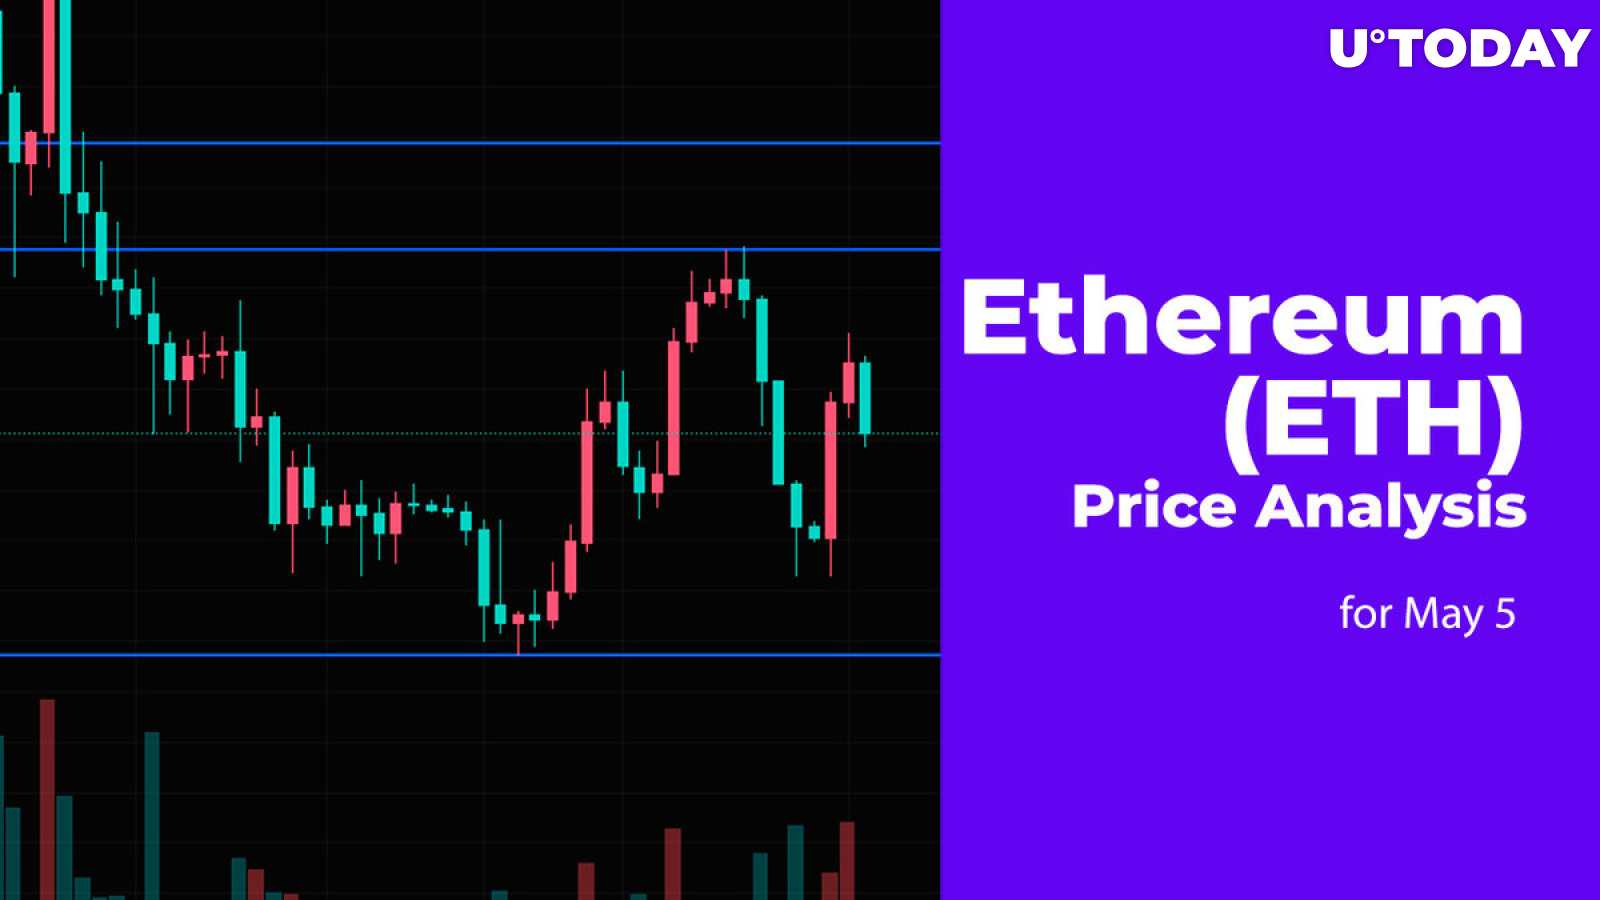 Ethereum (ETH) Price Analysis for May 5